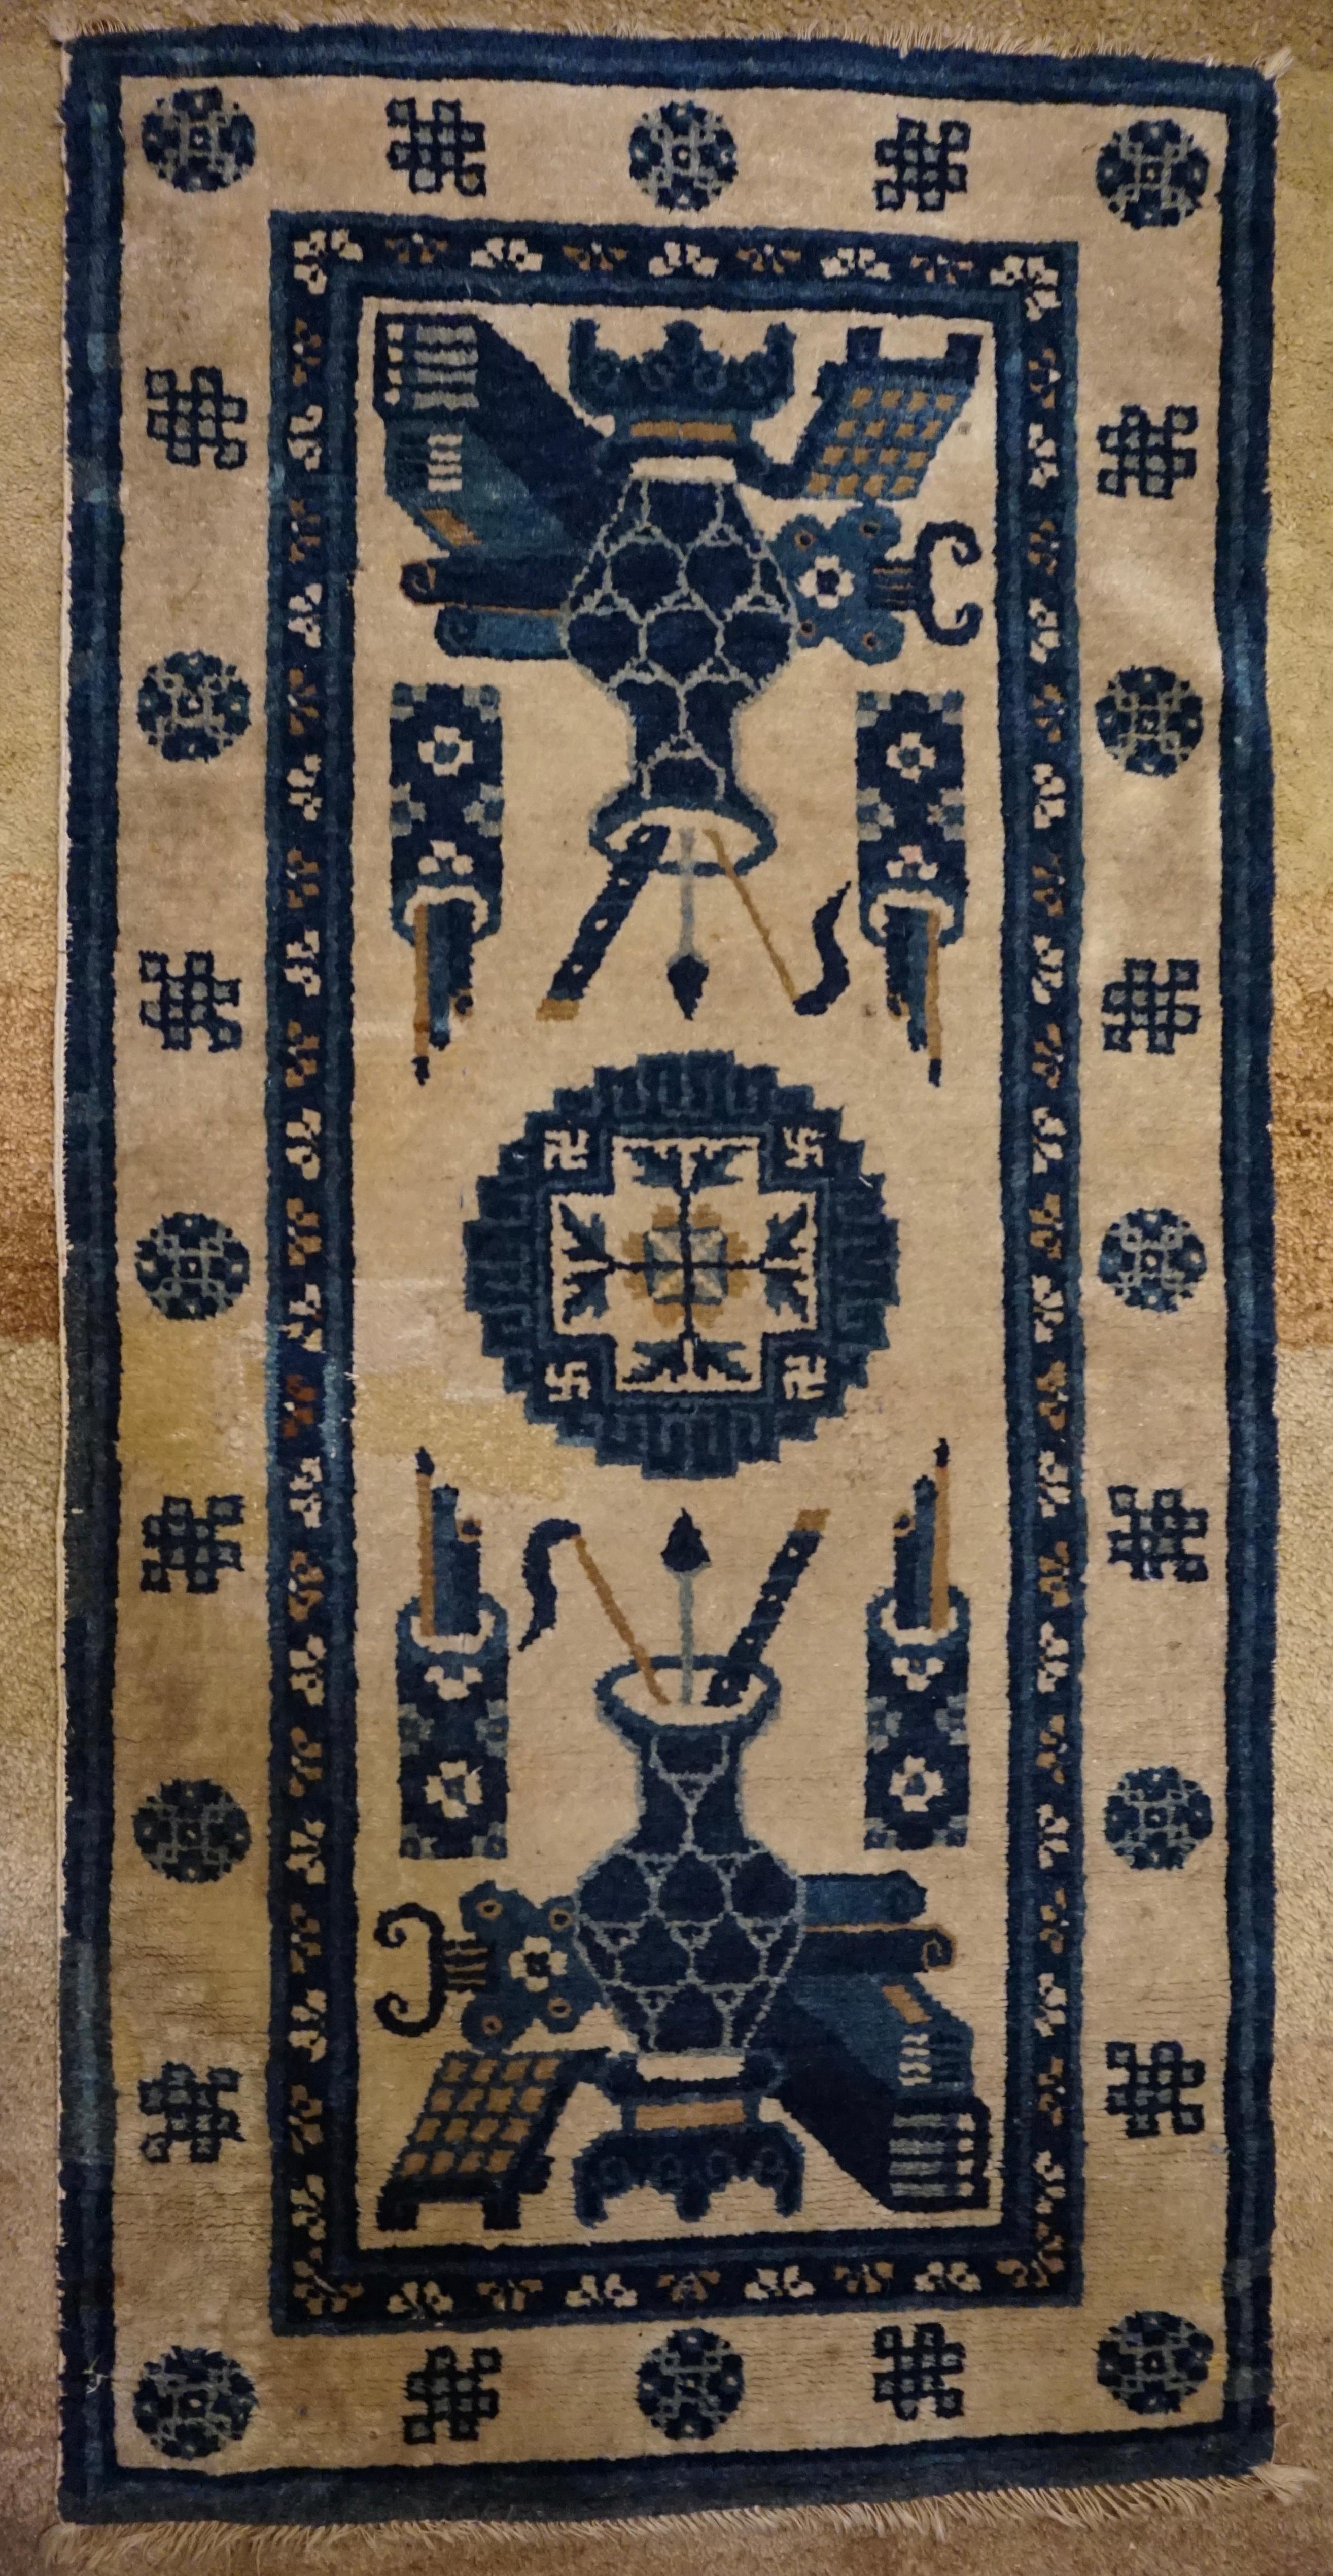 Early 20th Century Early 20th C. Blue & White Chinese Rug Depicting Scholar's Brush Pots & Objects